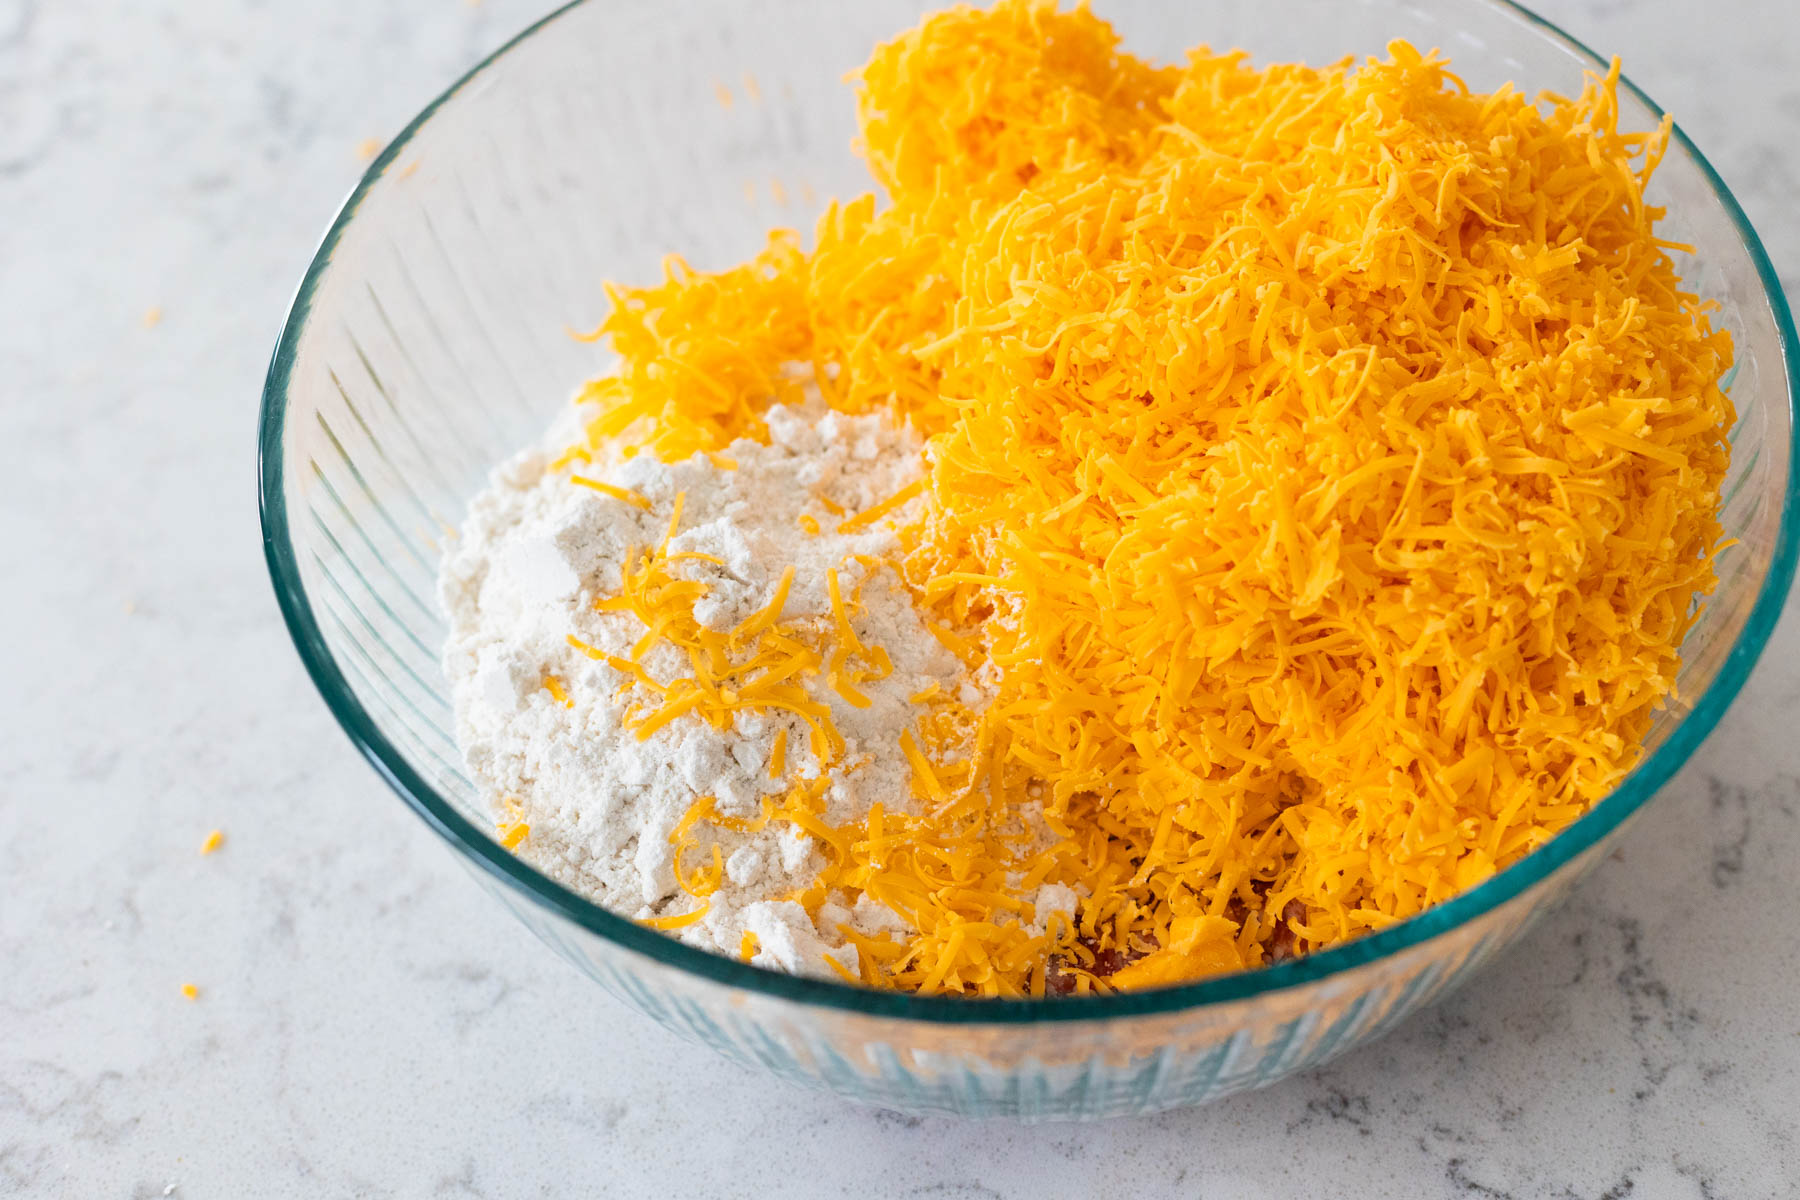 The large mixing bowl shows just how much cheddar cheese is involved in this recipe.